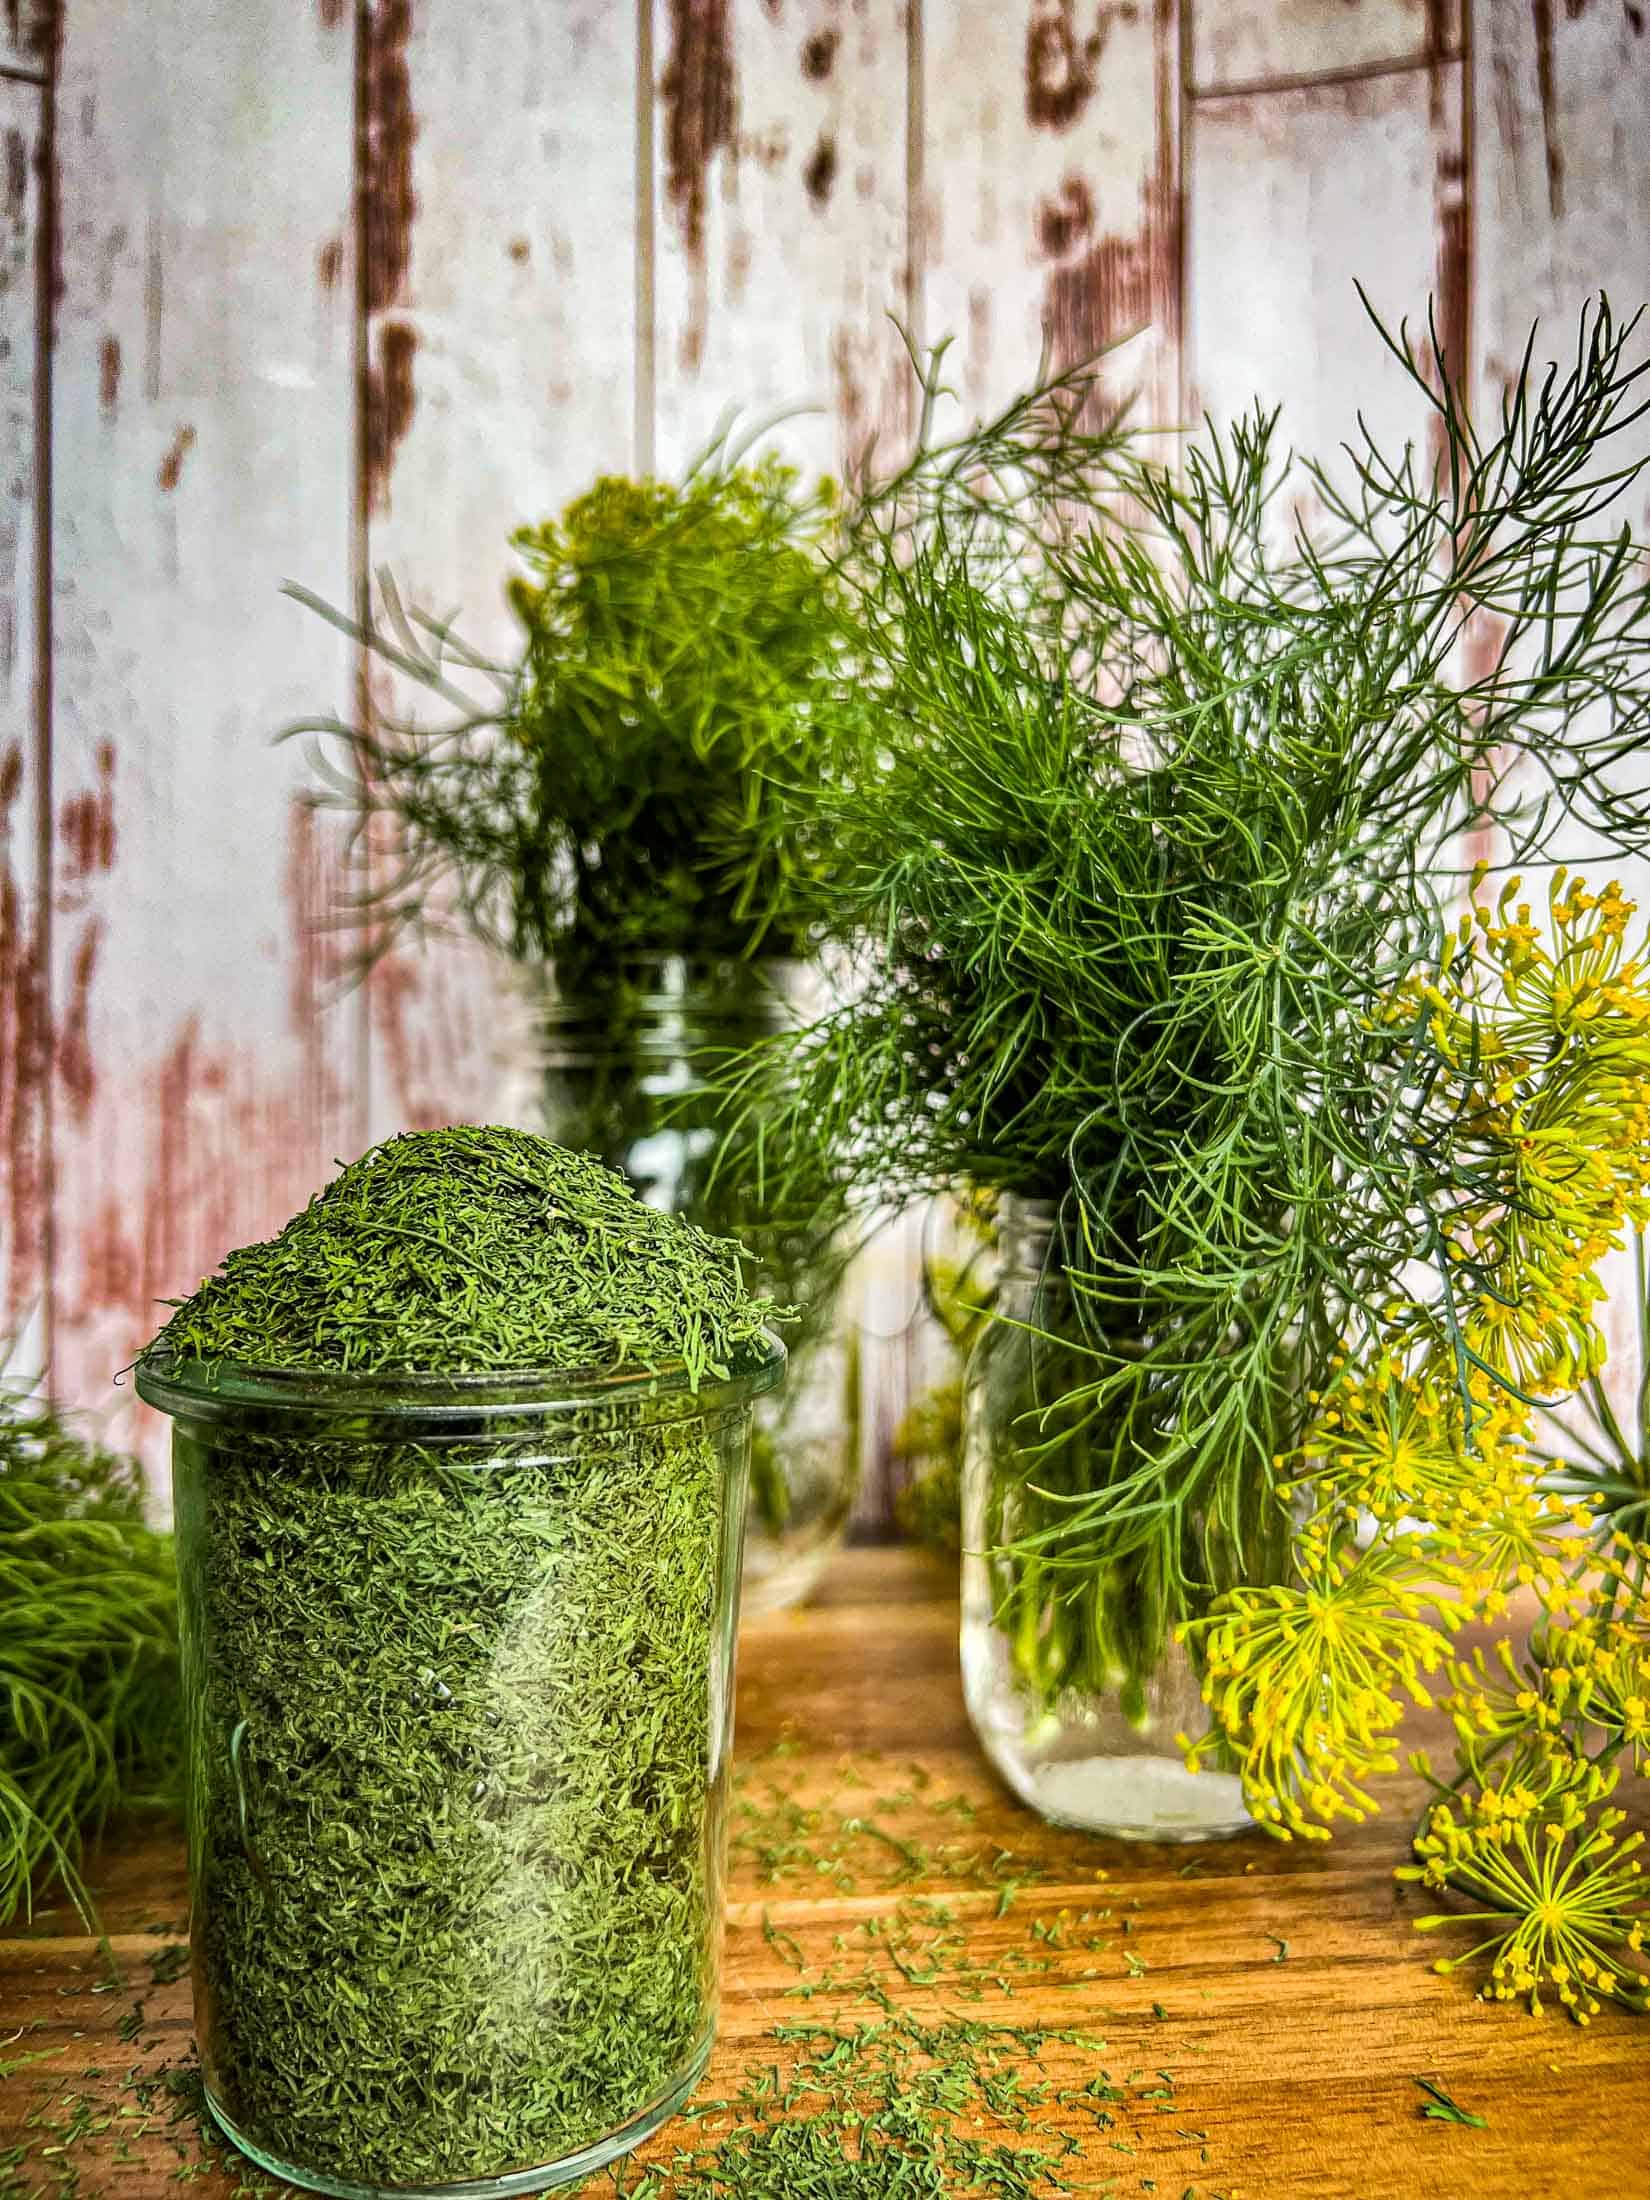 Dried dill spilling out of a glass jar on a wooden board with dill flowers and fresh dill sprigs.